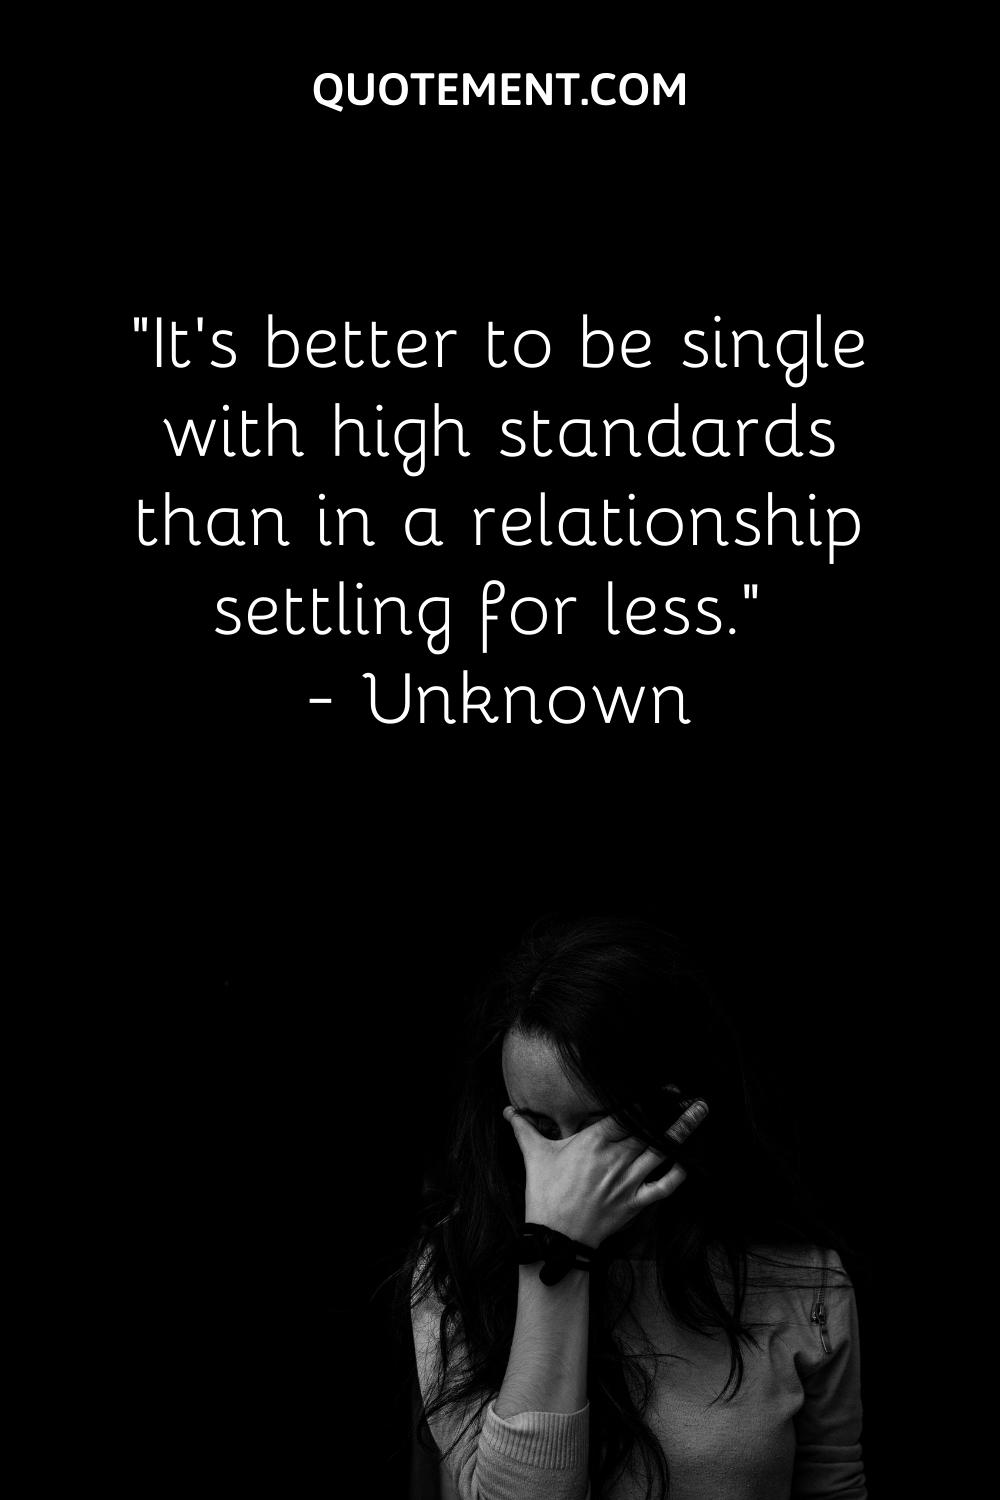 It’s better to be single with high standards than in a relationship settling for less